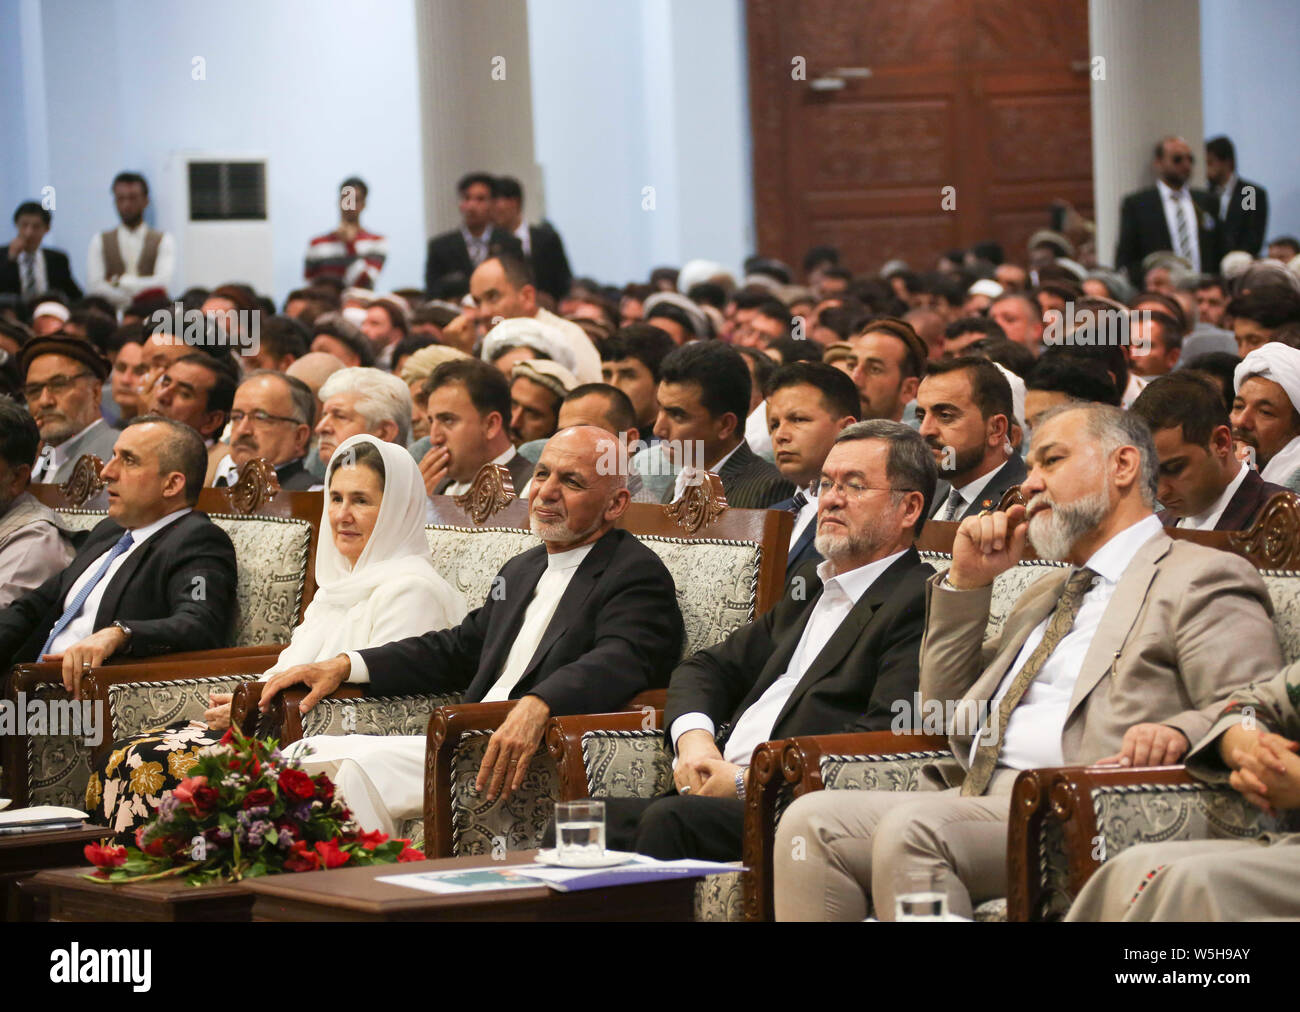 Kabul, Afghanistan. 28th July, 2019. Afghan presidential candidate Mohammad Ashraf Ghani (C, front) attends an election campaign in Kabul, capital of Afghanistan, July 28, 2019. Campaign for the Afghan presidential election in late September started on July 28 amid growing attacks and fear of frauds in the militancy-plagued country. A total of 18 candidates, including incumbent President Mohammad Ashraf Ghani, embarked on a two-month campaign which will conclude on Sept. 25. Credit: Rahmatullah Alizadah/Xinhua/Alamy Live News Stock Photo